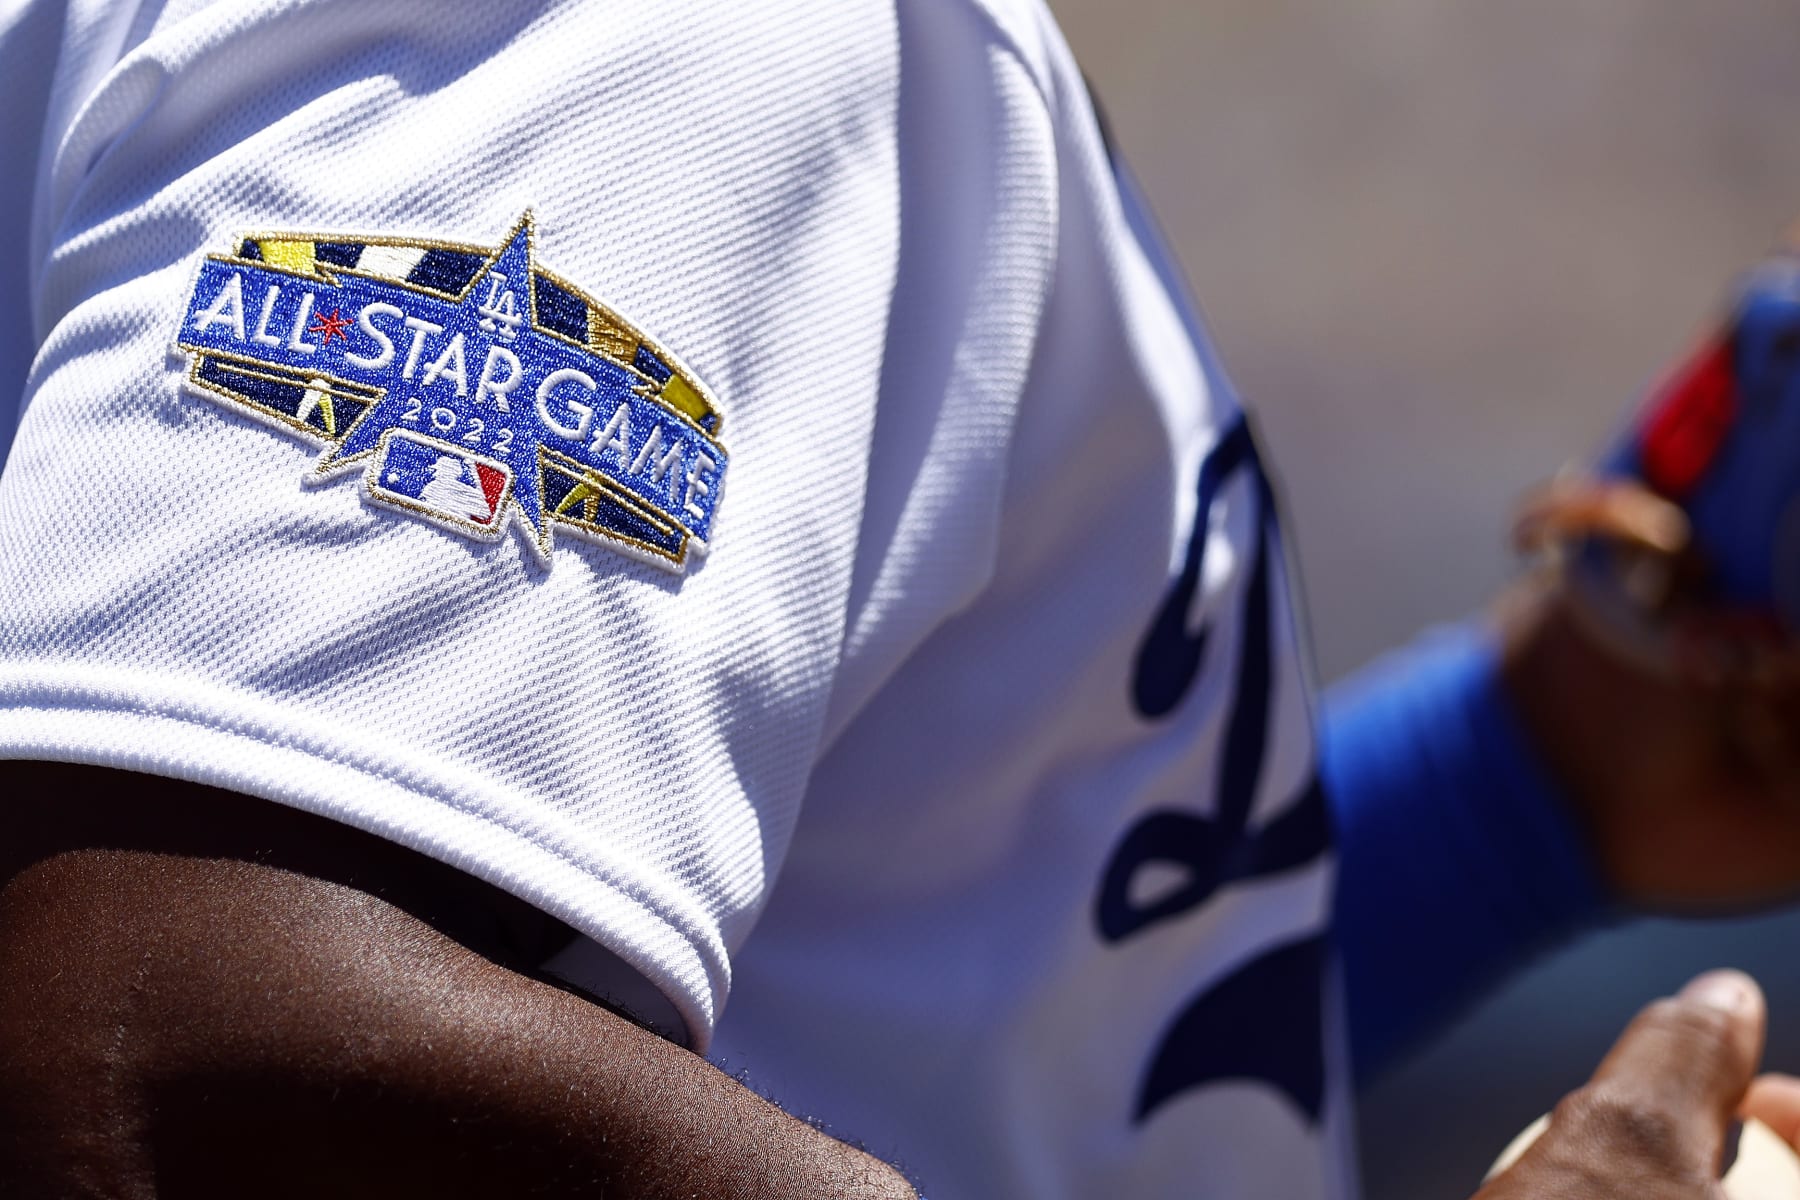 Dodger Stadium concession workers will not strike during All-Star